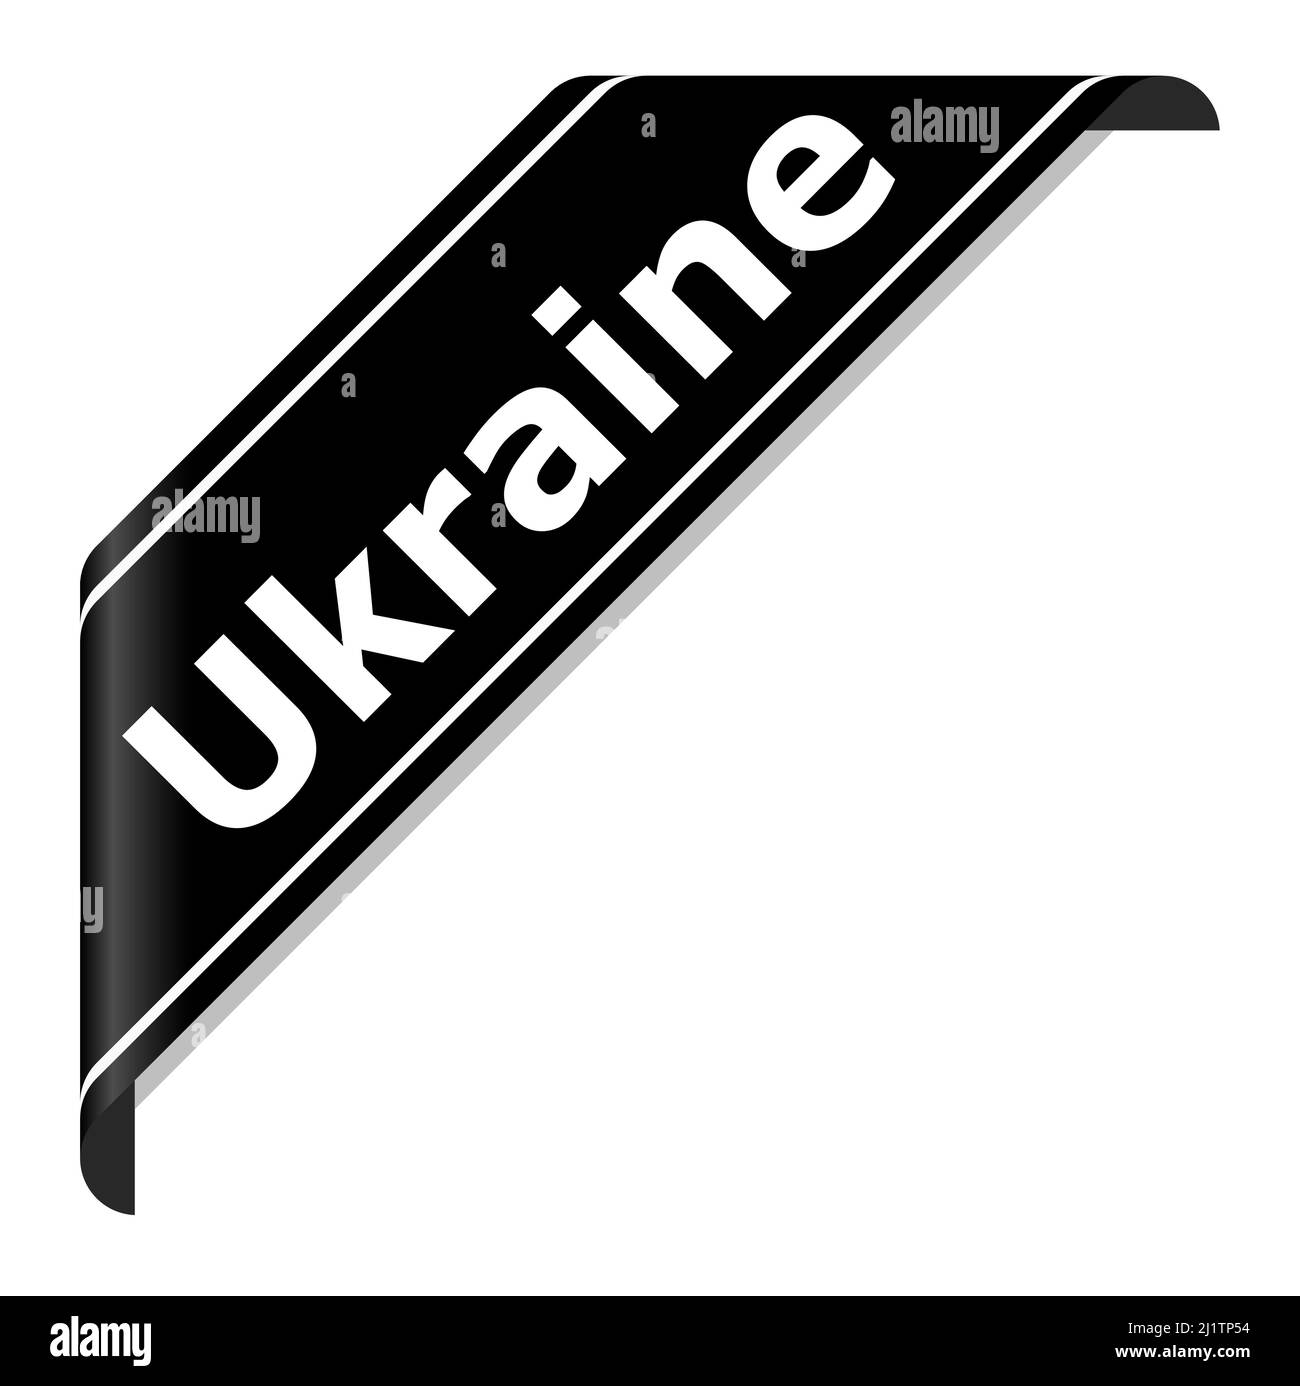 eps vector illustration of black mourning banner with text ukraine - STOP WAR - conflict with russia 2022 Stock Vector